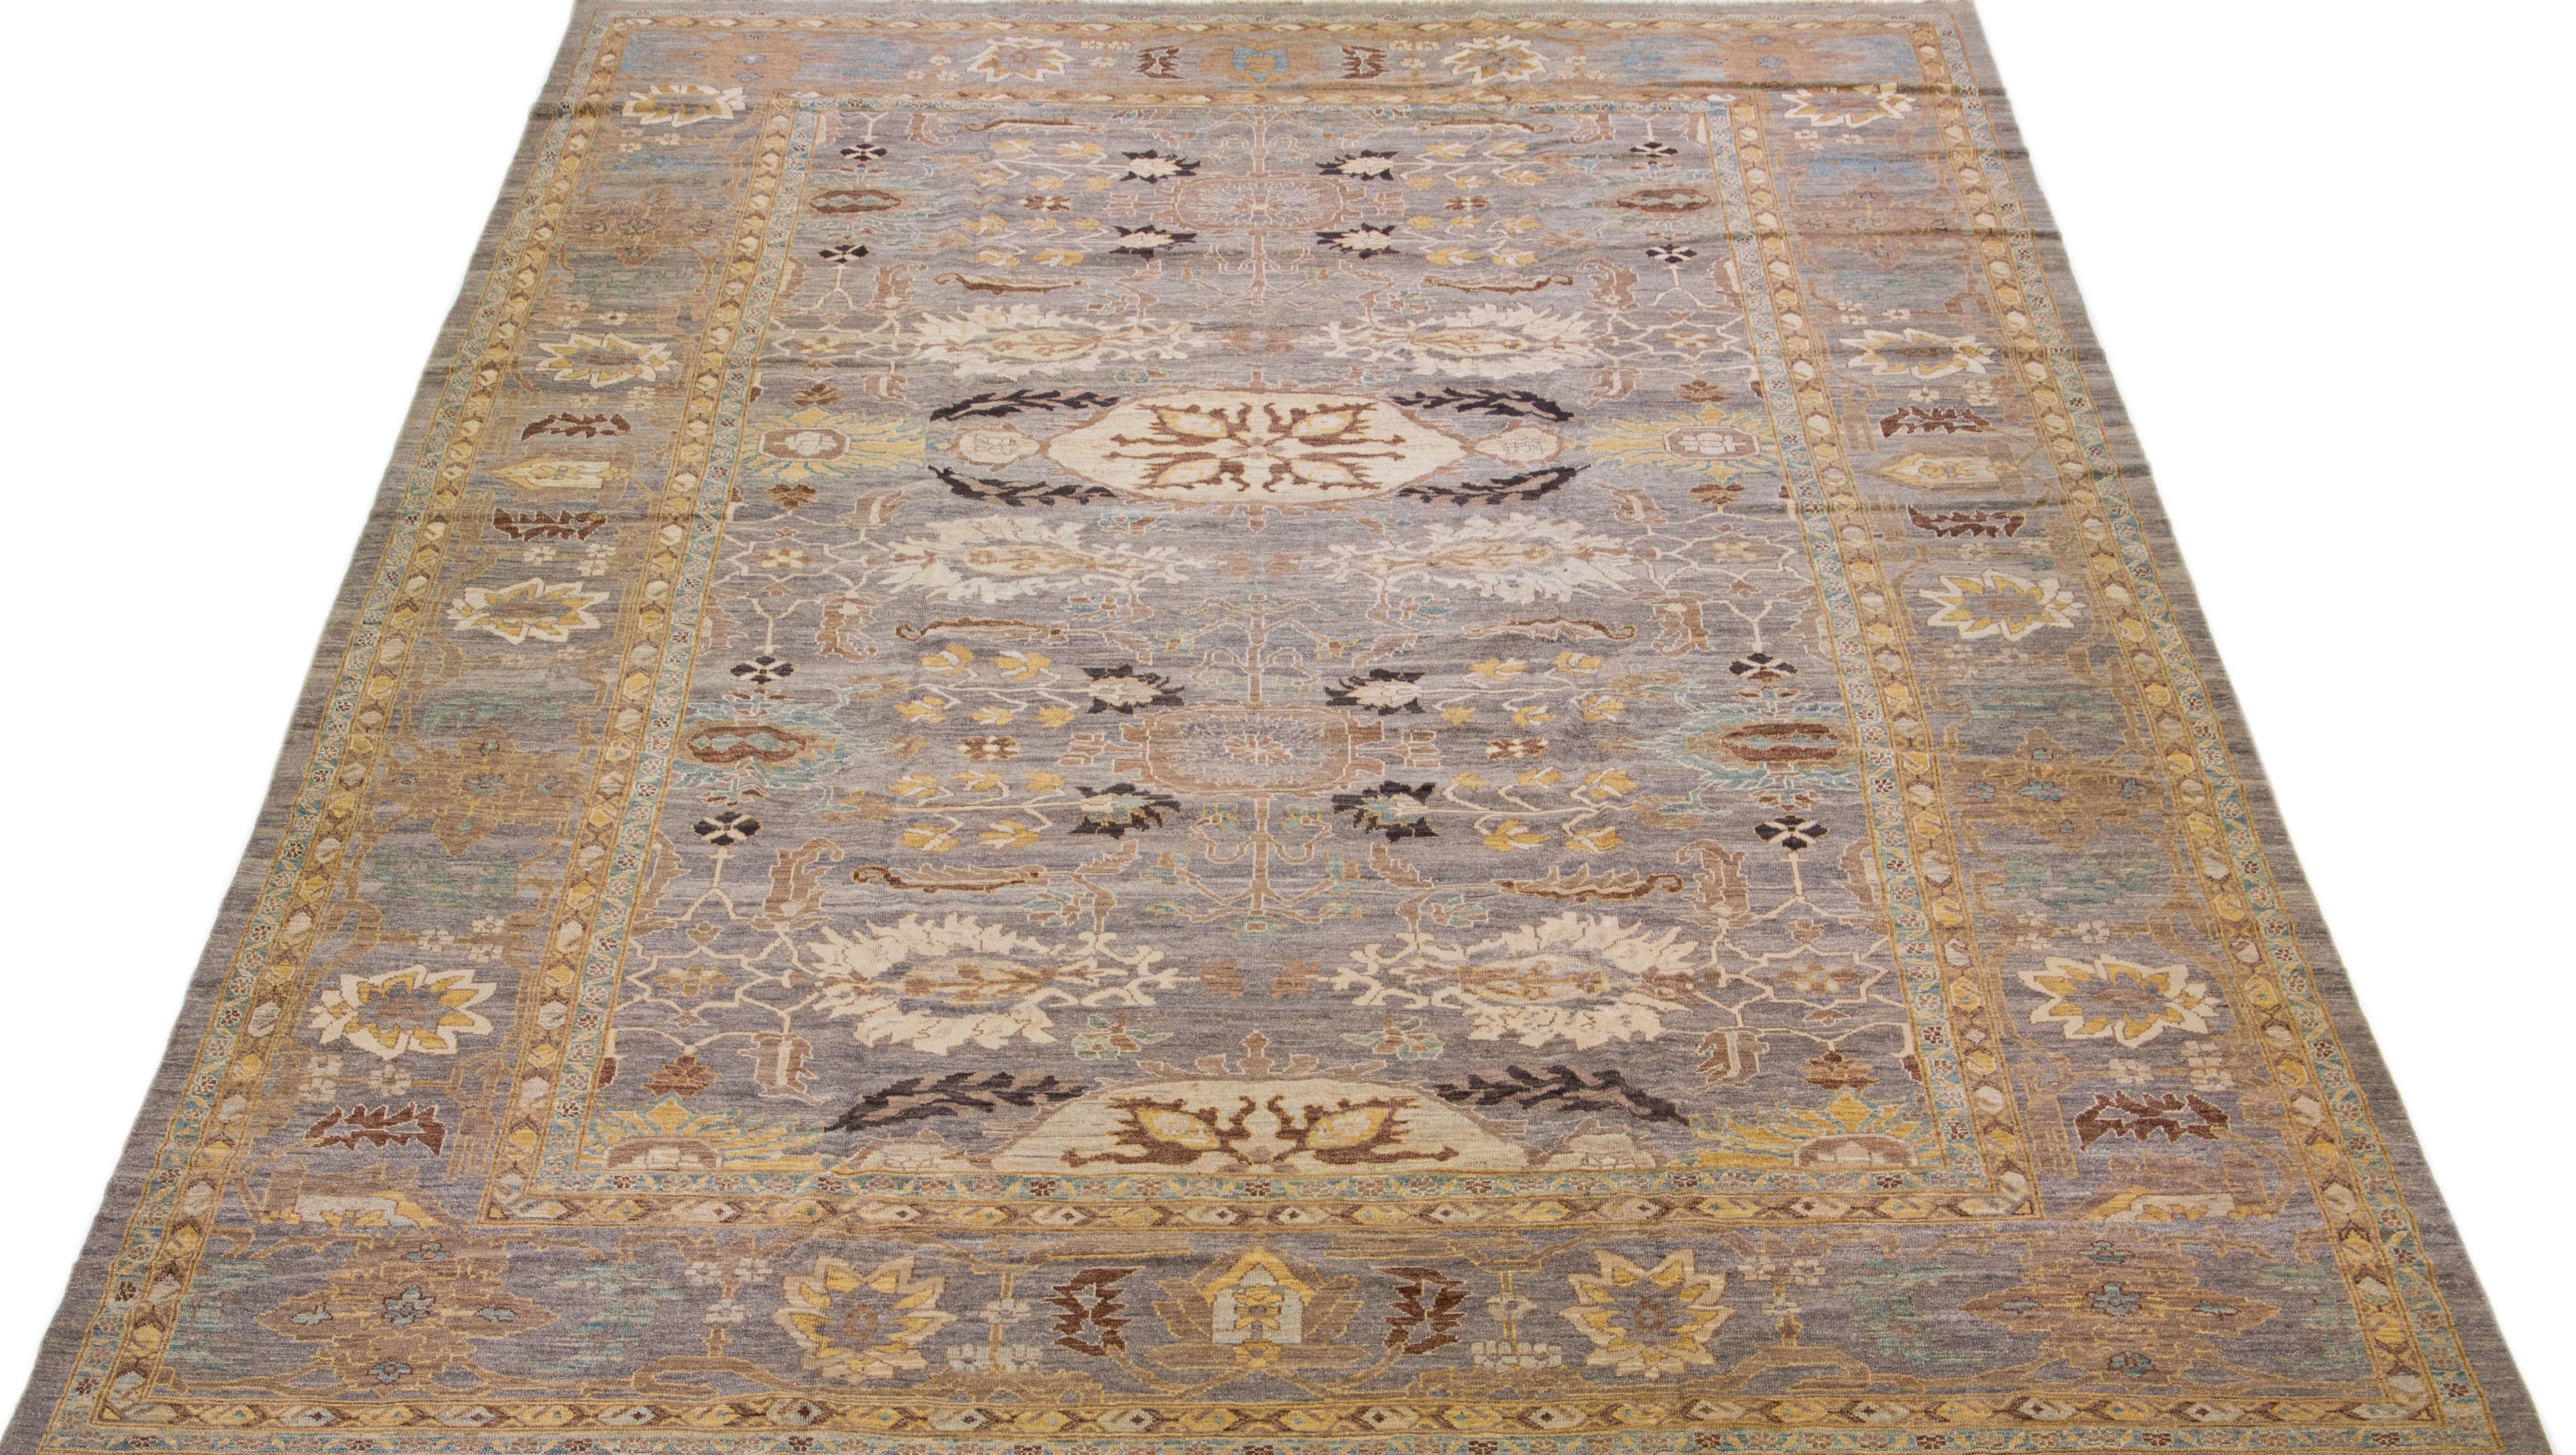 Beautiful modern Sultanabad hand-knotted wool rug with a gray color field. This rug has a designed frame with yellow, blue, and brown accents in a gorgeous all-over floral design.

This rug measures: 13'3